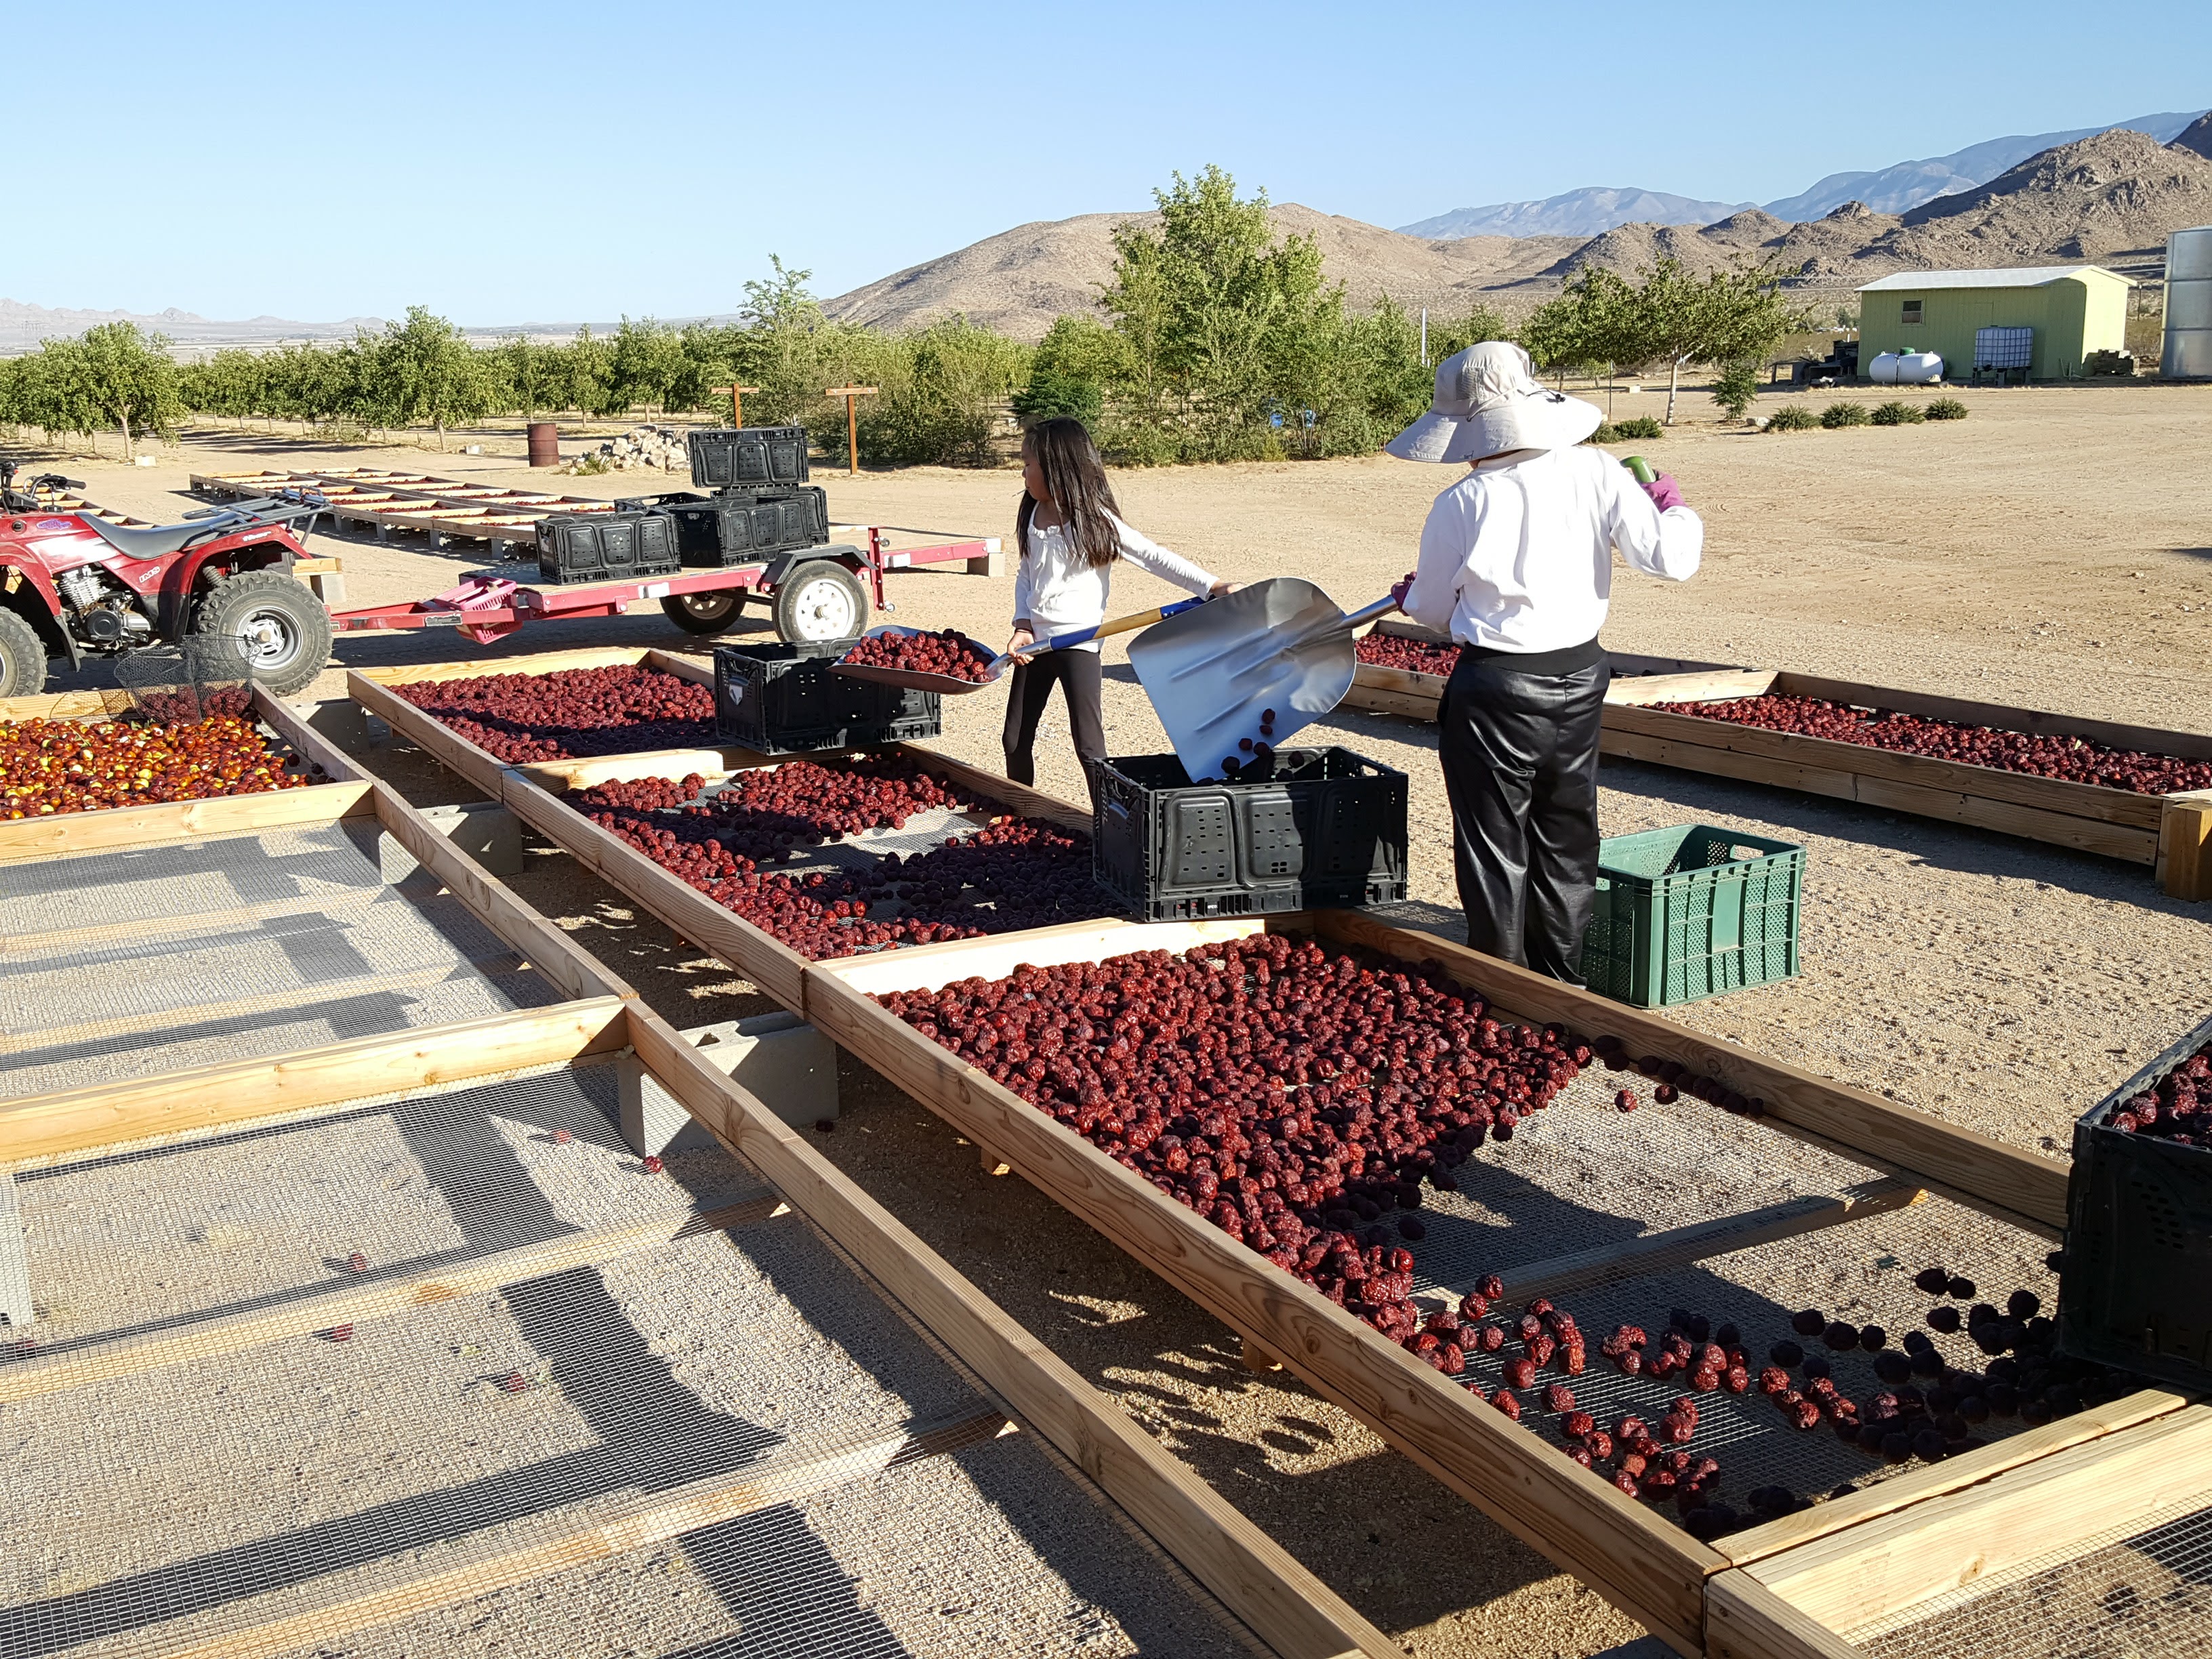 The scene at David Paeng's Serenity Farm in Lucerne Valley, Calif., where he grows jujubes. (David Paeng)